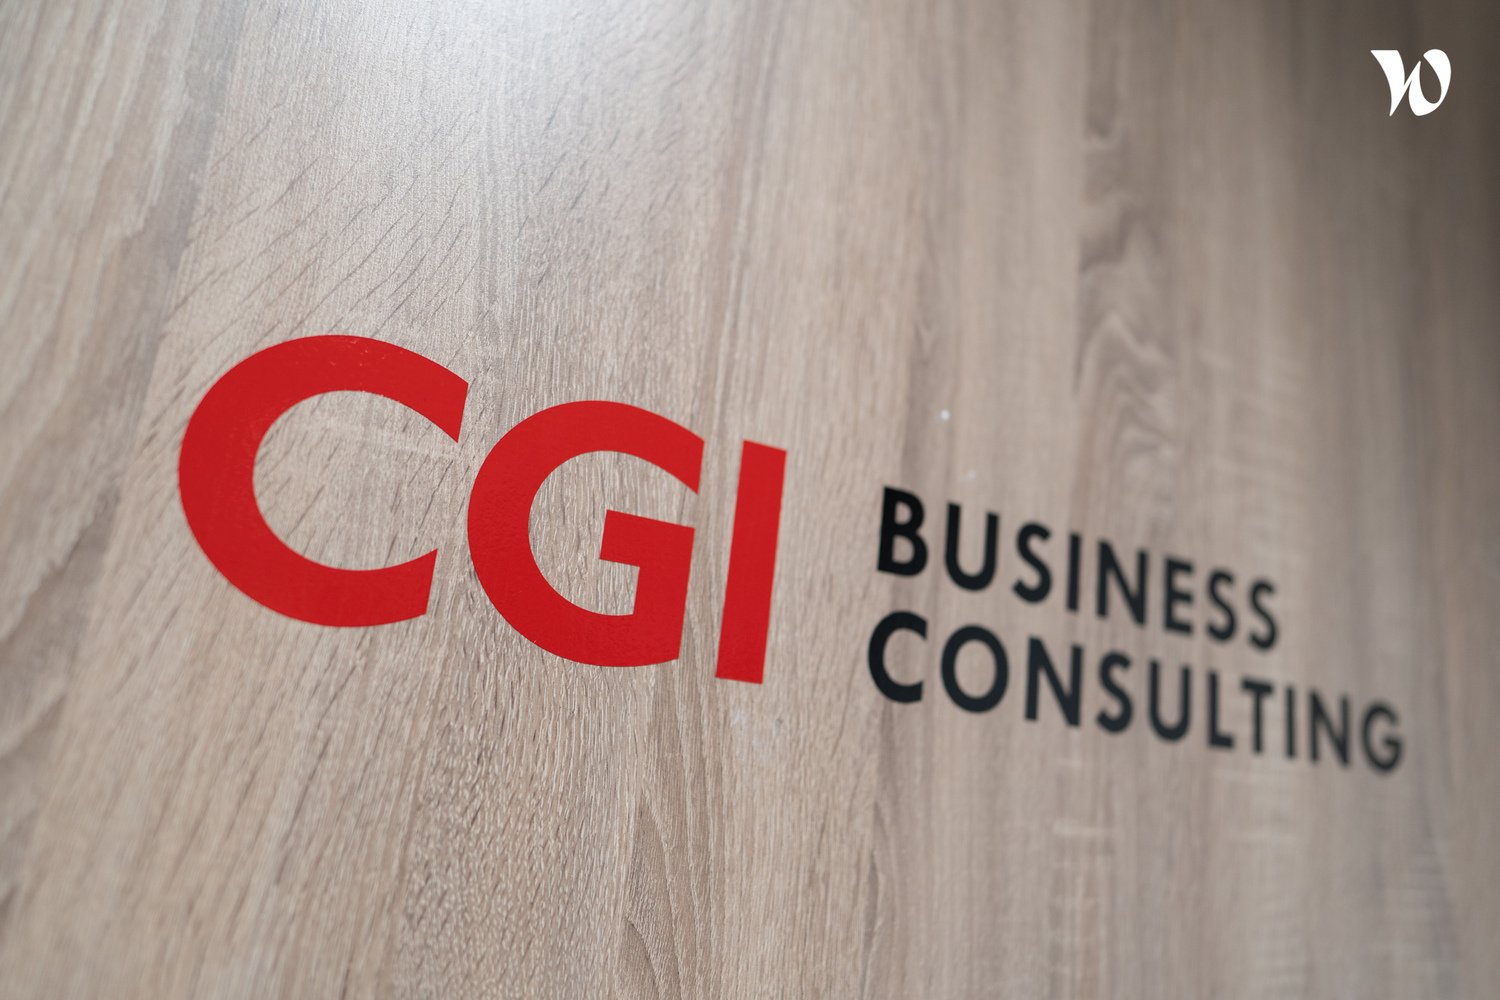 Culture+ CGI Business Consulting